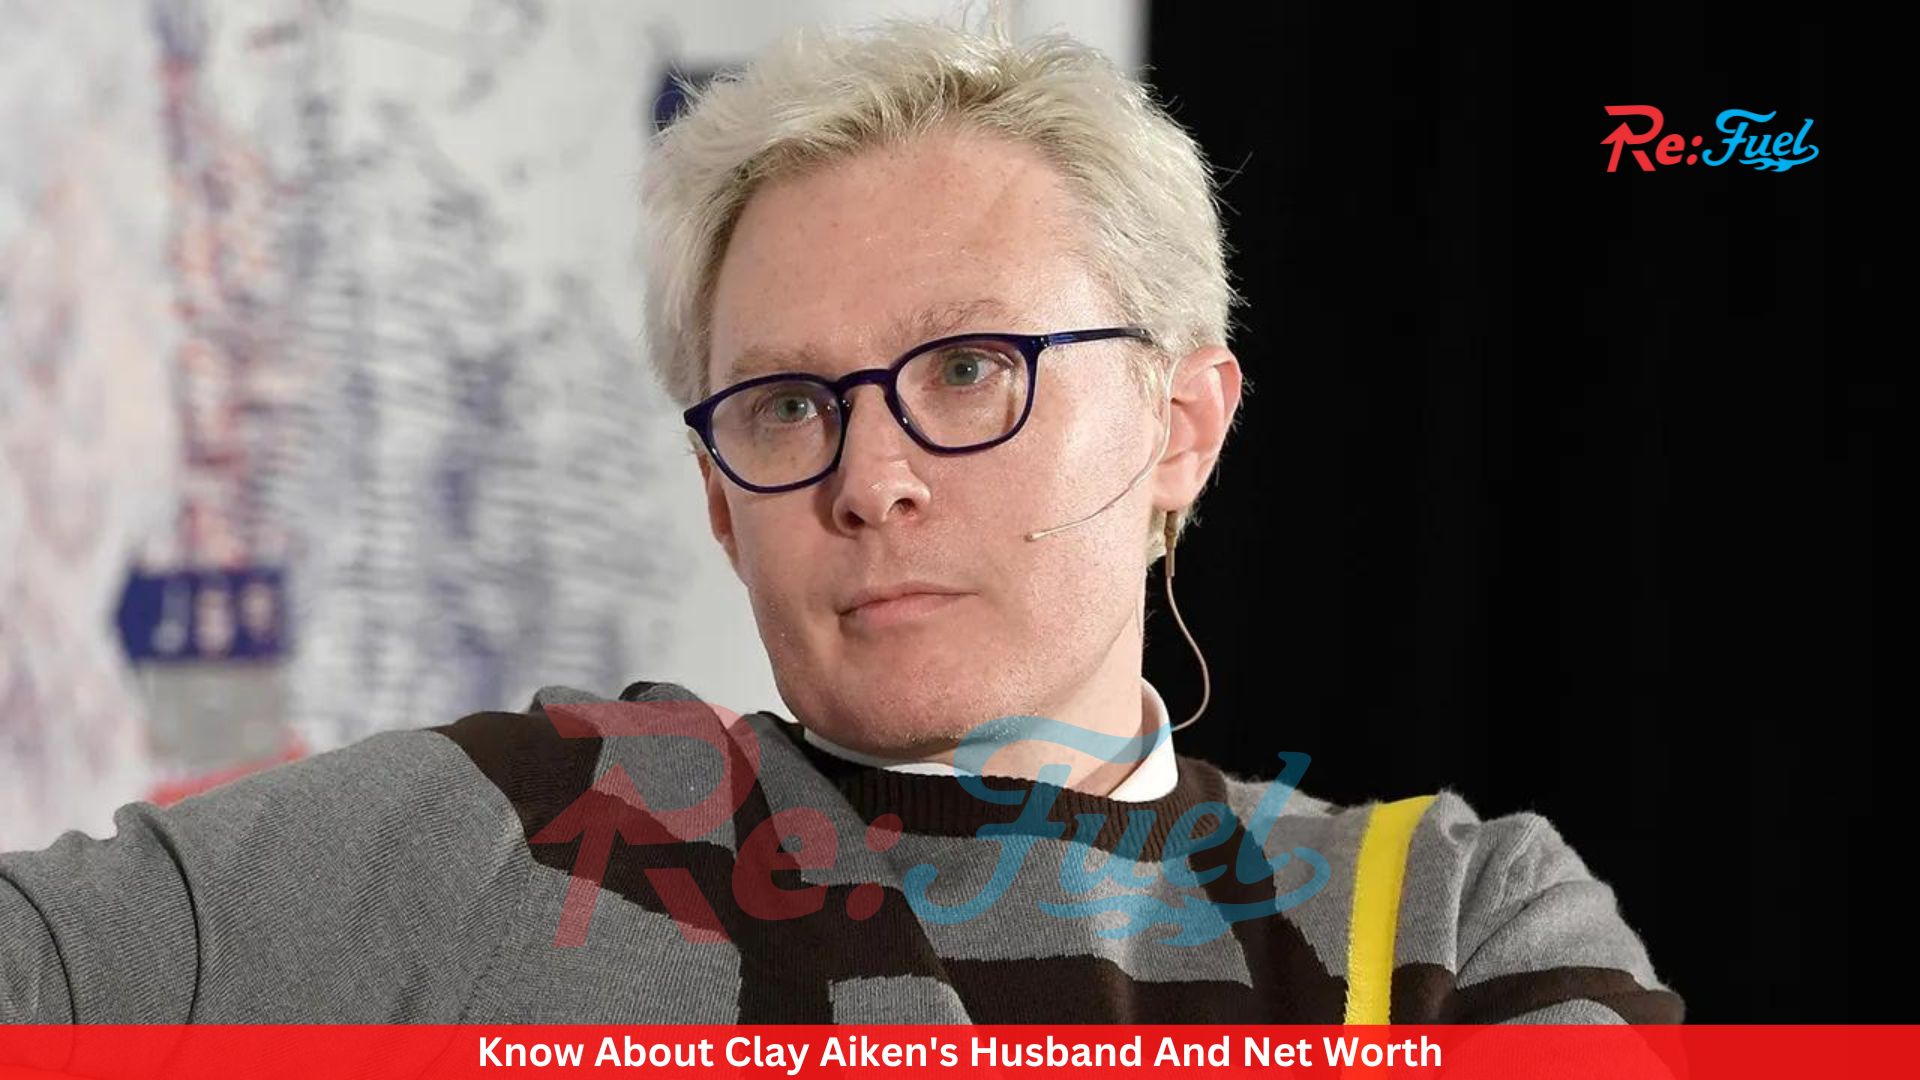 Know About Clay Aiken's Husband And Net Worth